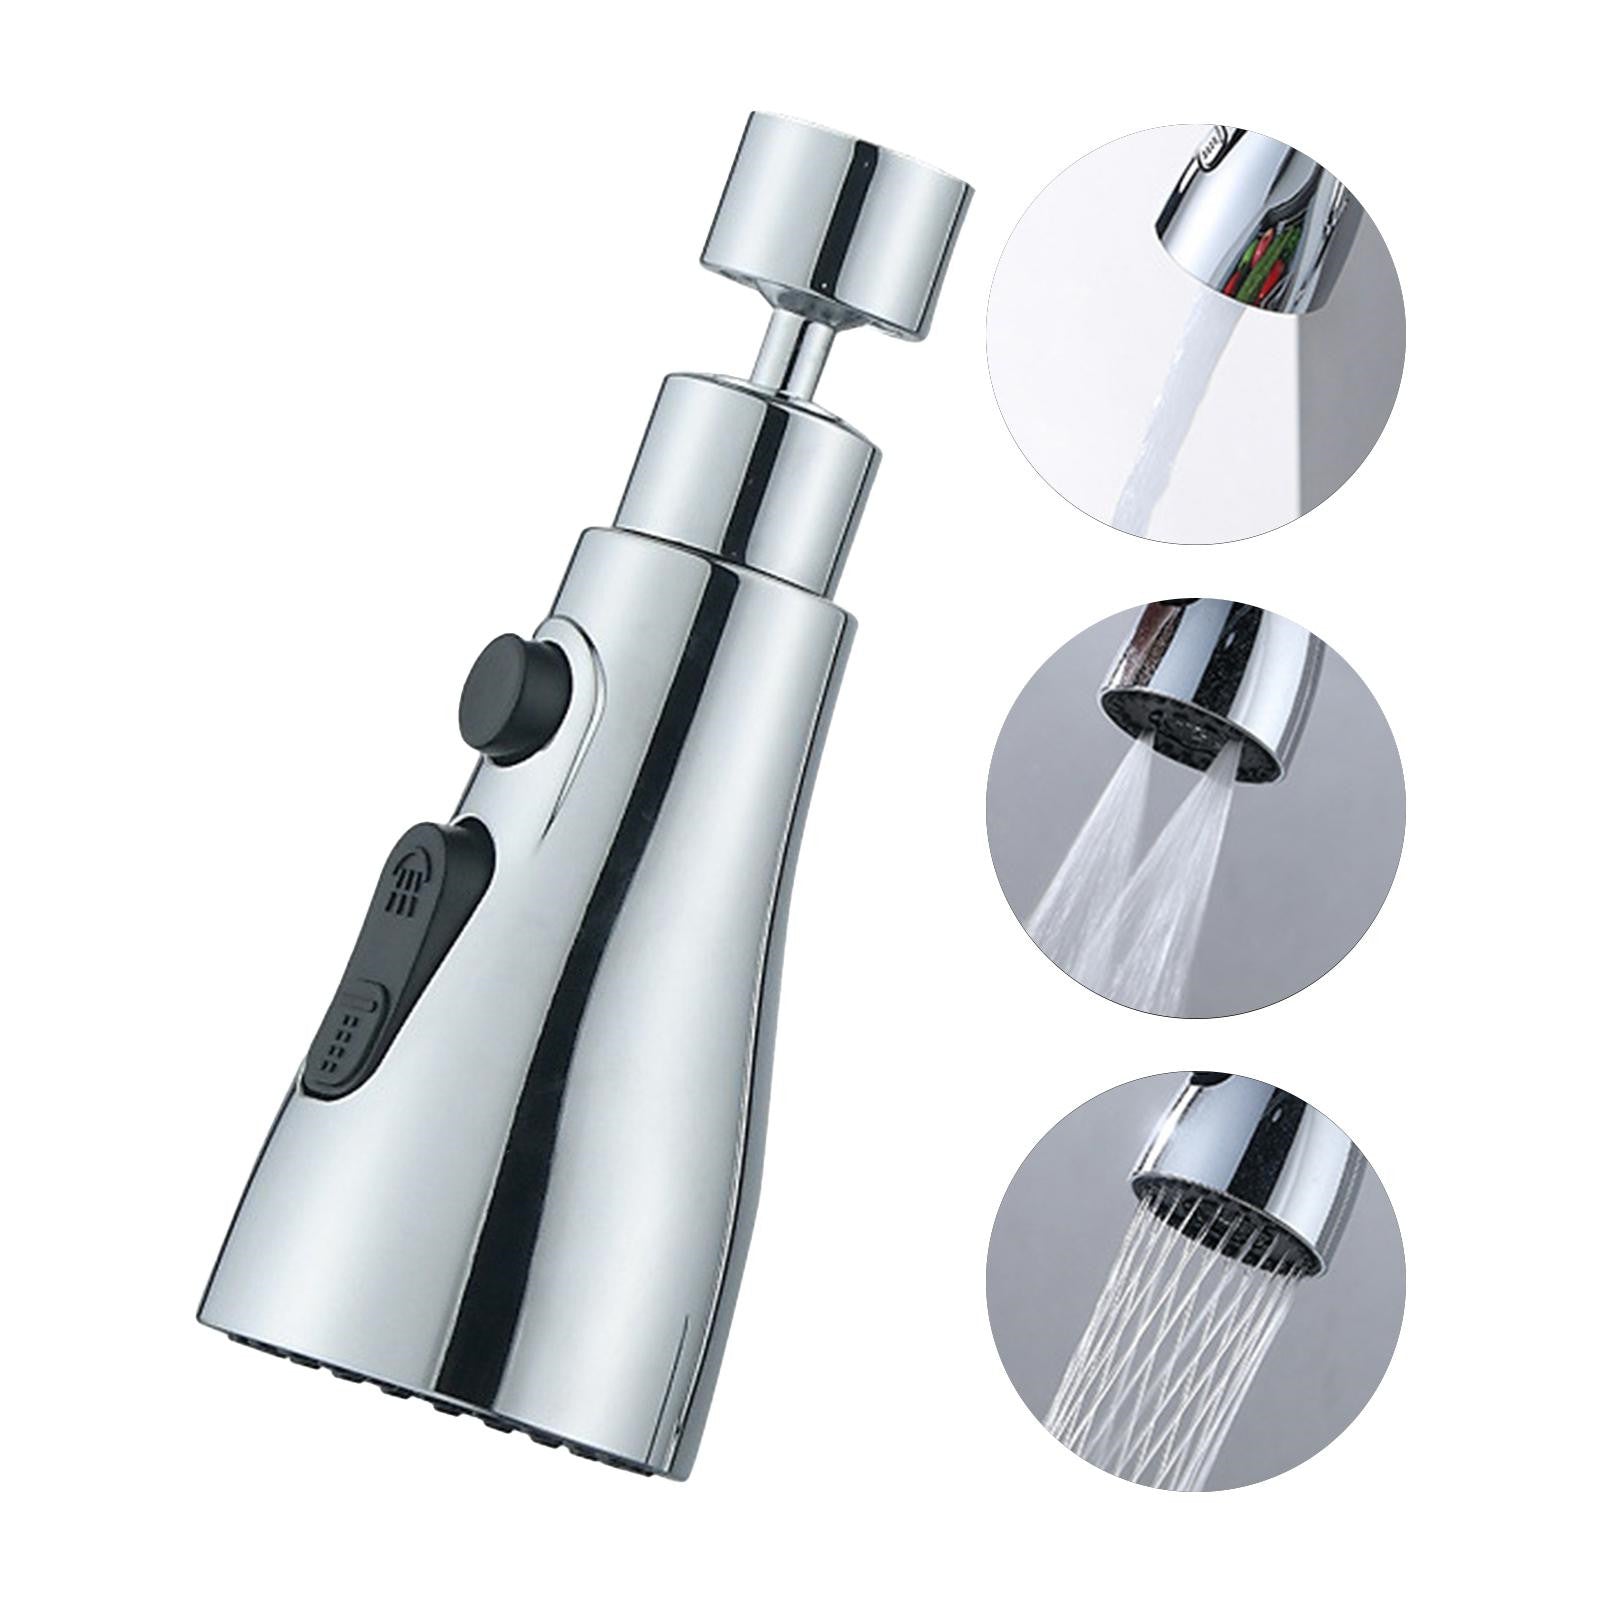 Universal Pressurized Faucet Sprayer Anti-splash 360 Degree Rotating Water Tap - Faucet Accessories -  Trend Goods